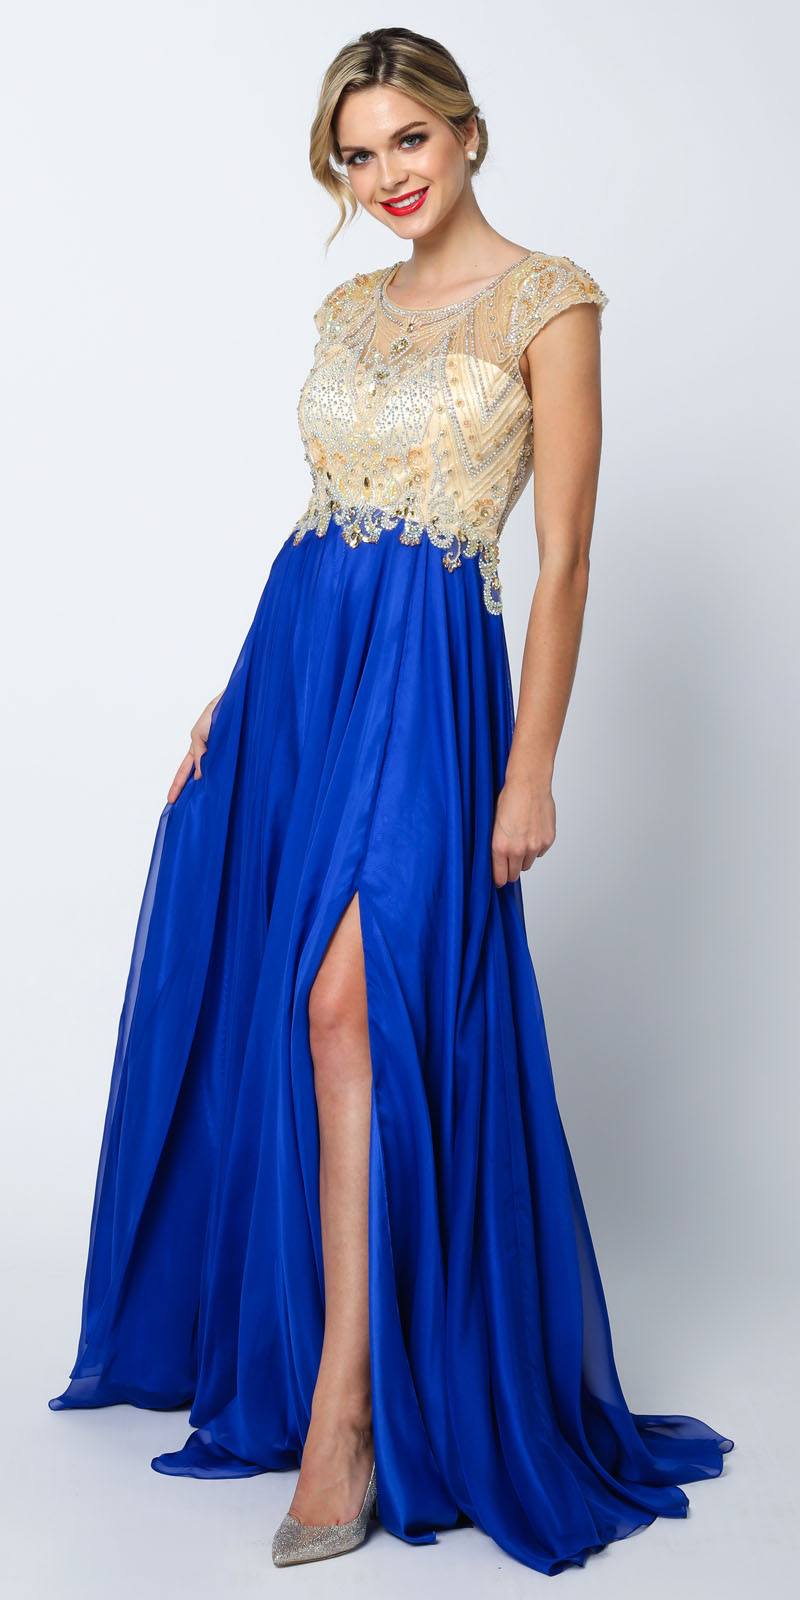 Juliet 636 Royal Blue Beaded Bodice Cap Sleeve Prom Gown with Slit and Train